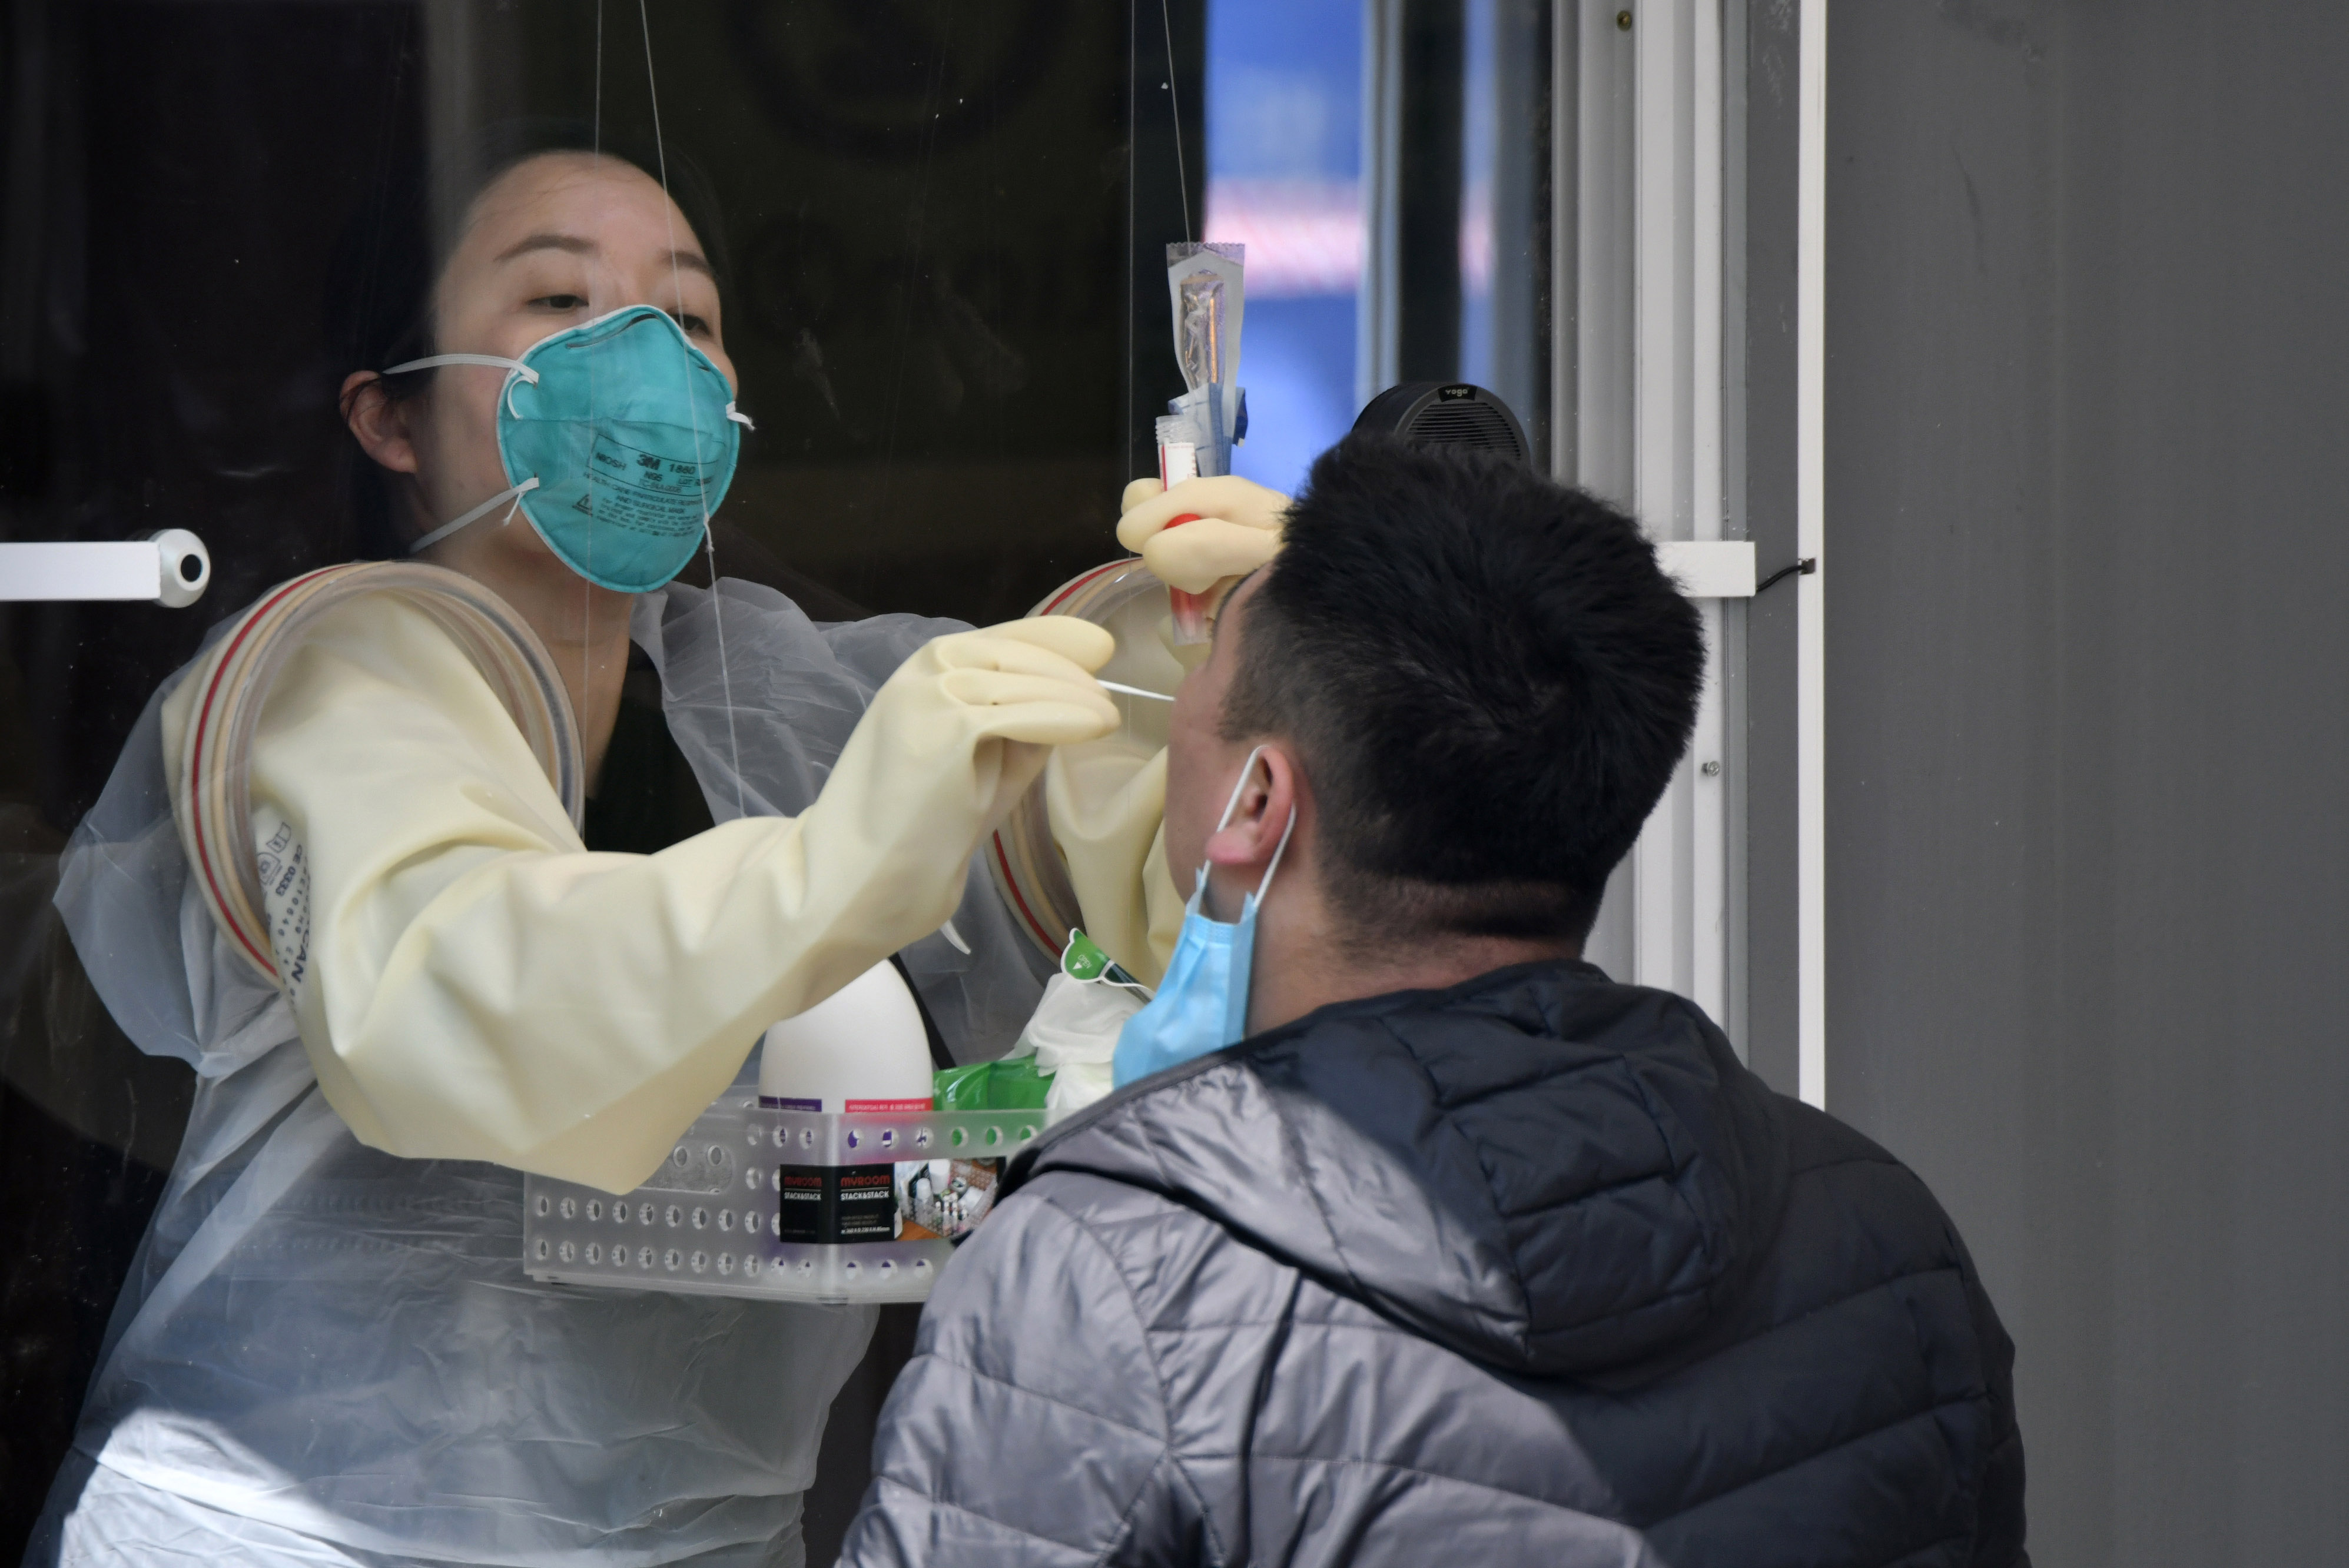 A medical staff member takes samples from a man at a walk-thru Covid-19 testing station set up at Jamsil Sports Complex in Seoul, South Korea, on April 3.